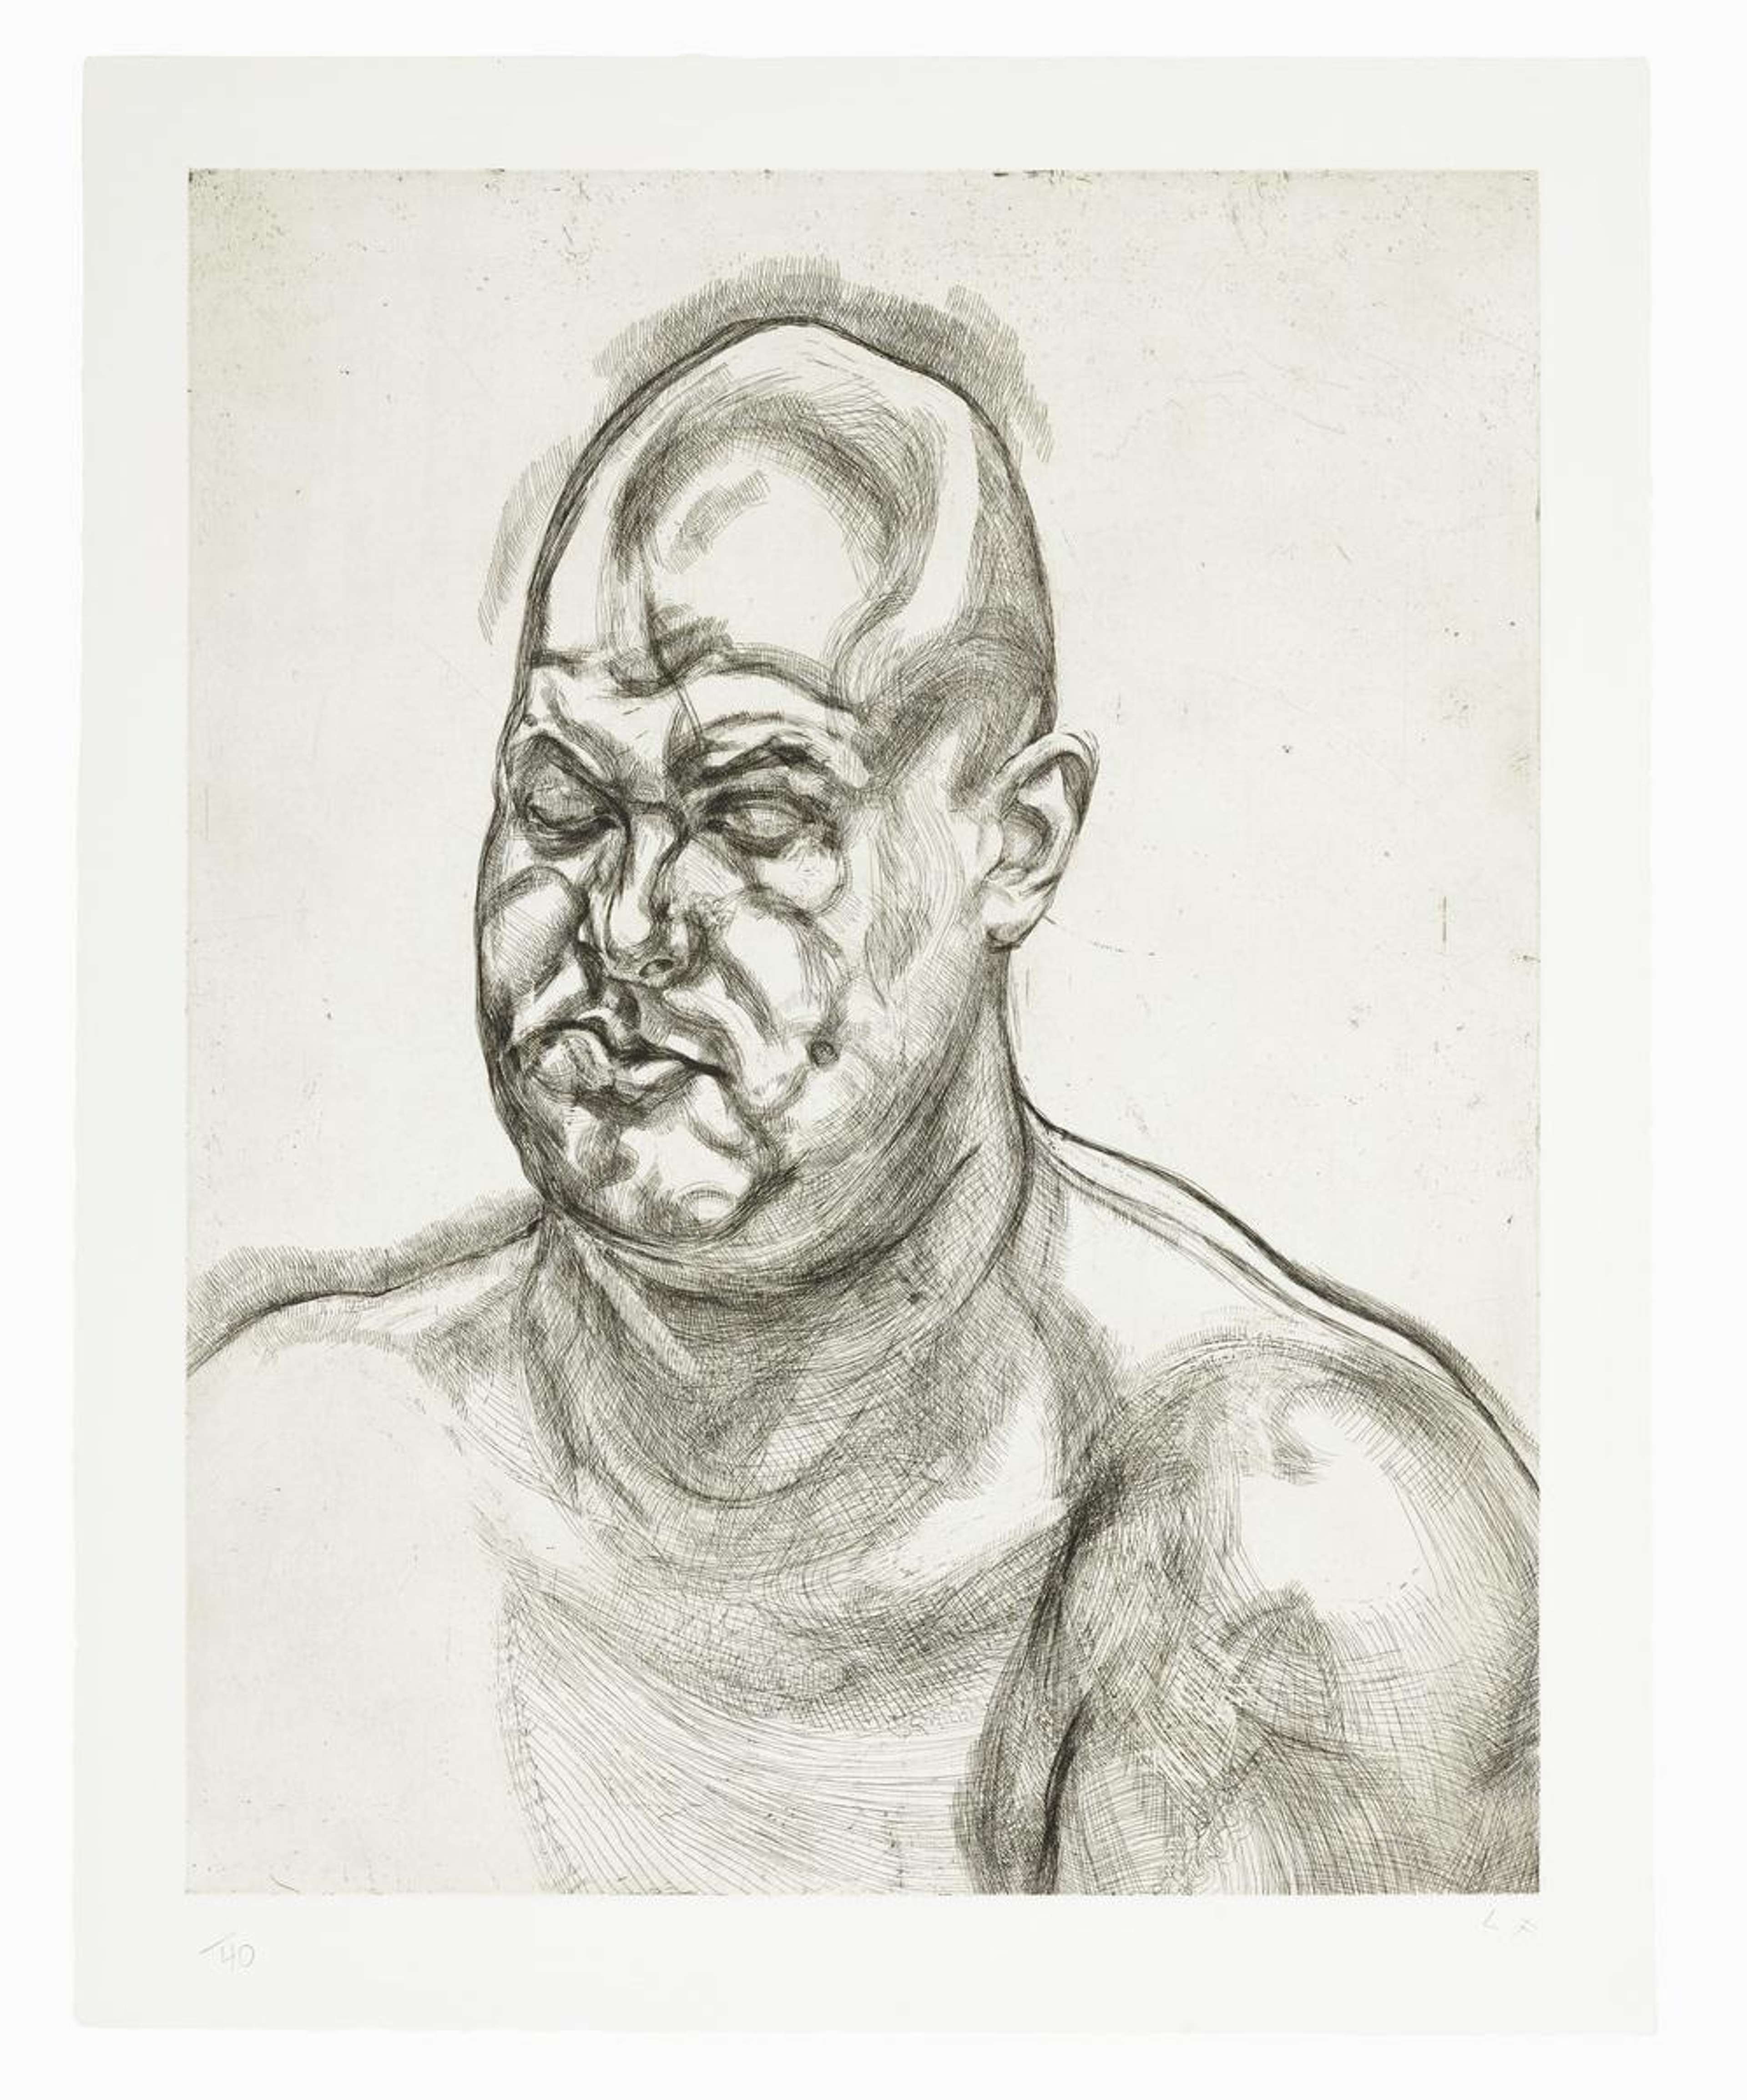 An image of the print Large Head State II by Lucian Freud. It shows a bald, shirtless man, modelled after Leigh Bowery. The work is done in monochrome.